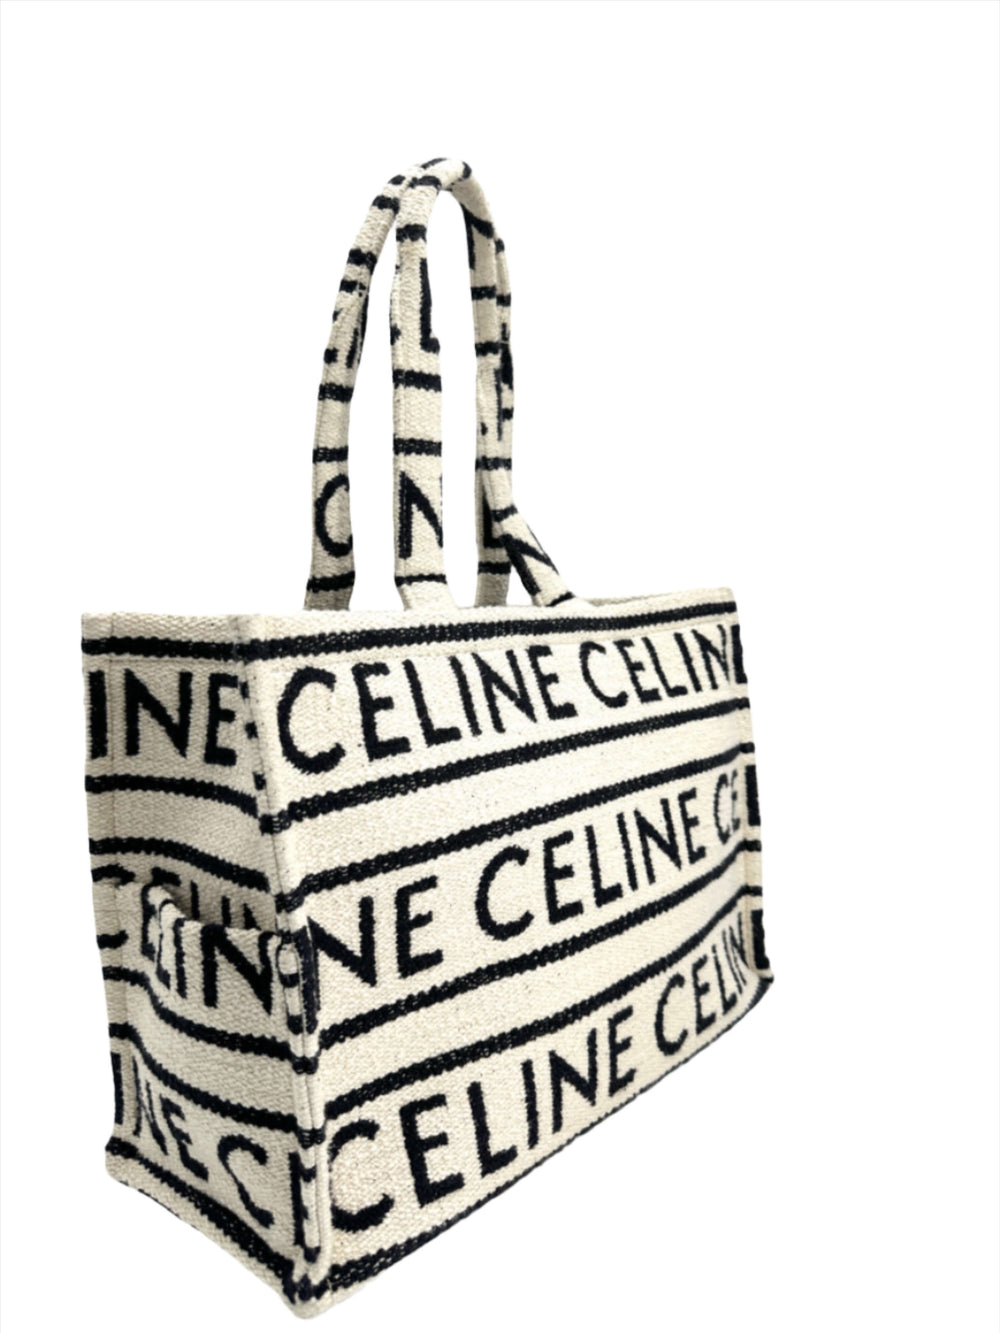 CELINE Canvas Large All Over Cabas Thais bag with black and white striped design featuring the brand's name.